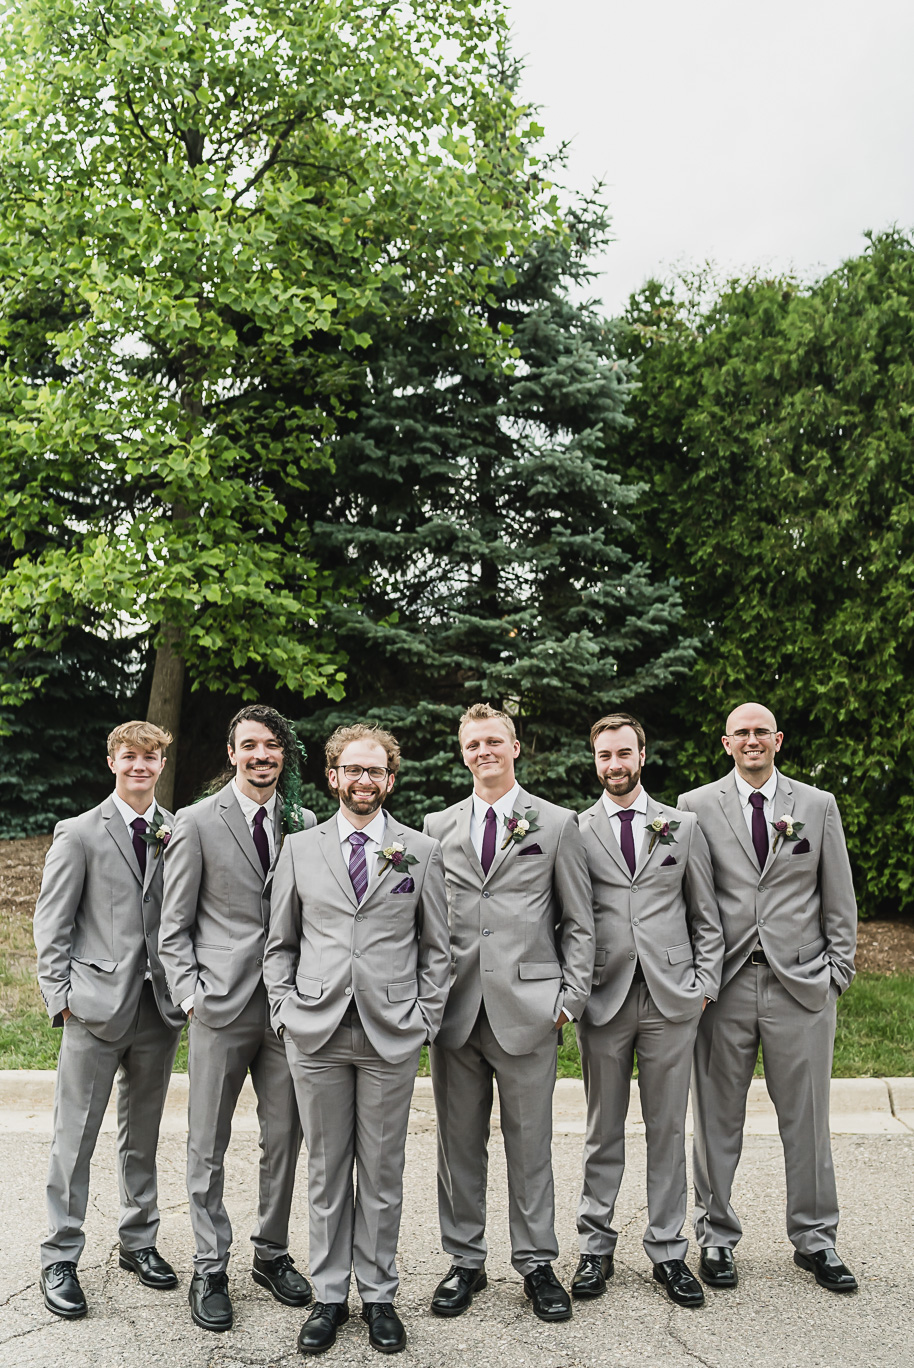 Summer purple and gray Petruzzellos wedding in Troy, Michigan provided by Kari Dawson, top-rated Rochester wedding photographer, and her team.